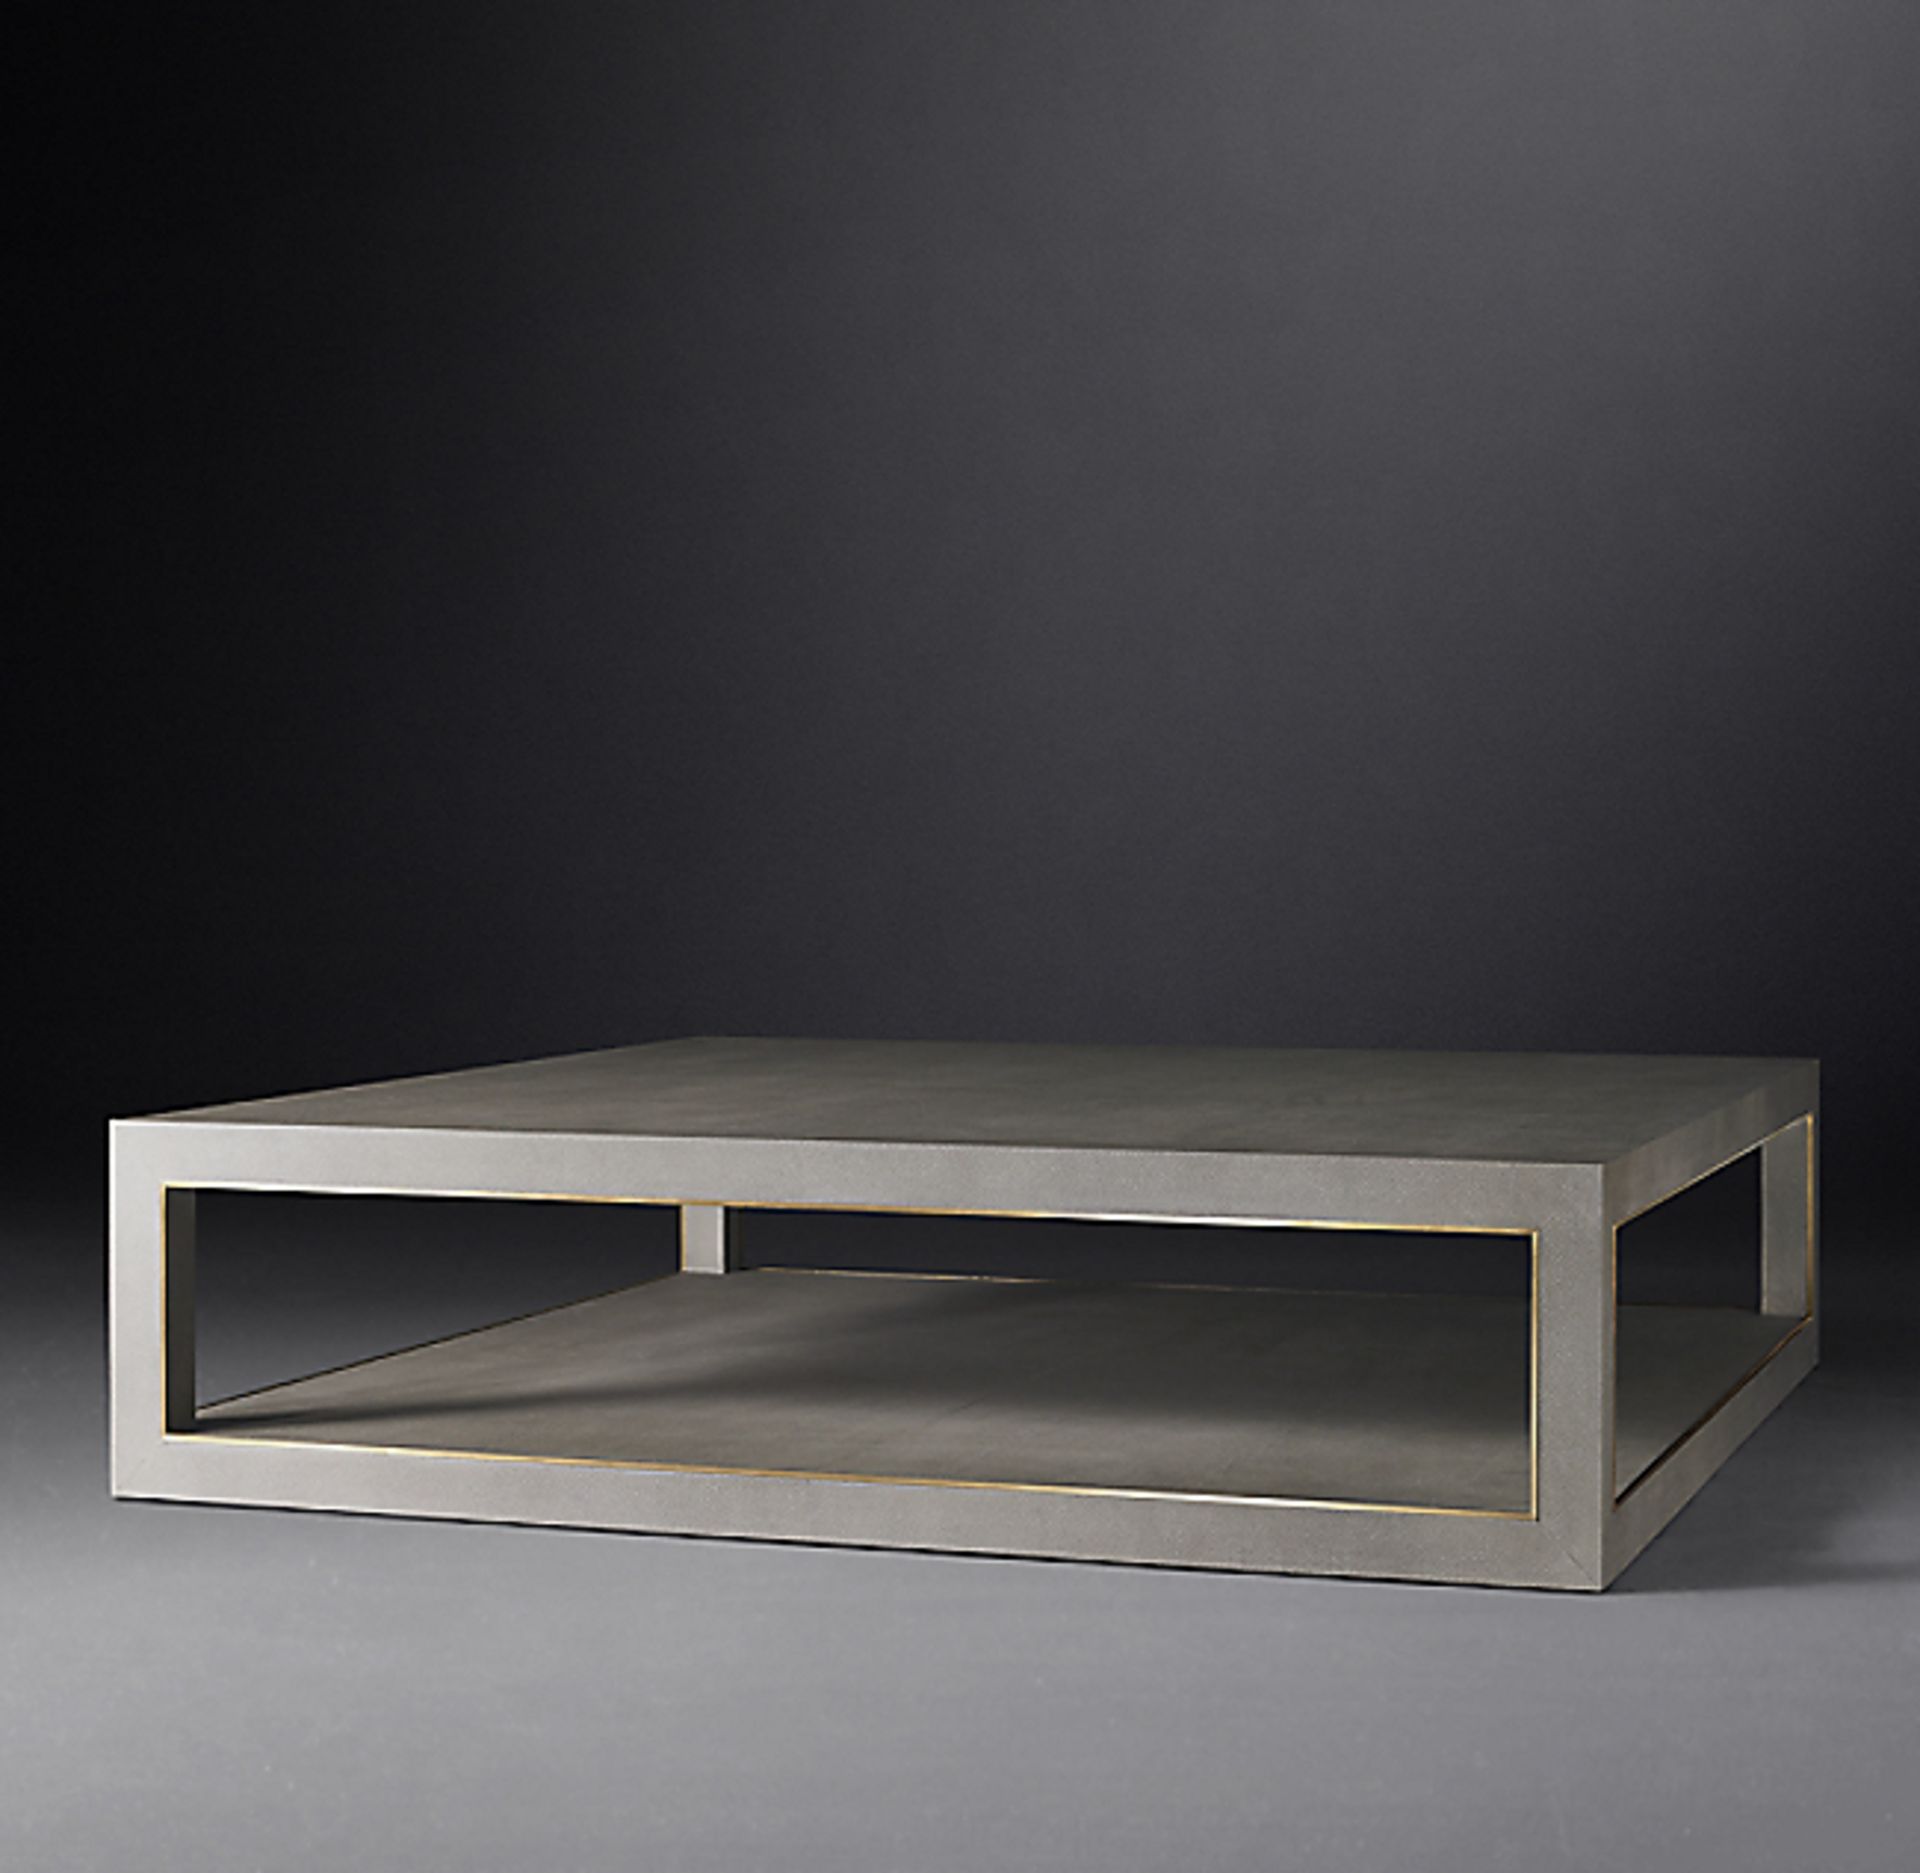 Cela Grey Shagreen Square Coffee Table Crafted Of Shagreen-Embossed Leather With The Texture